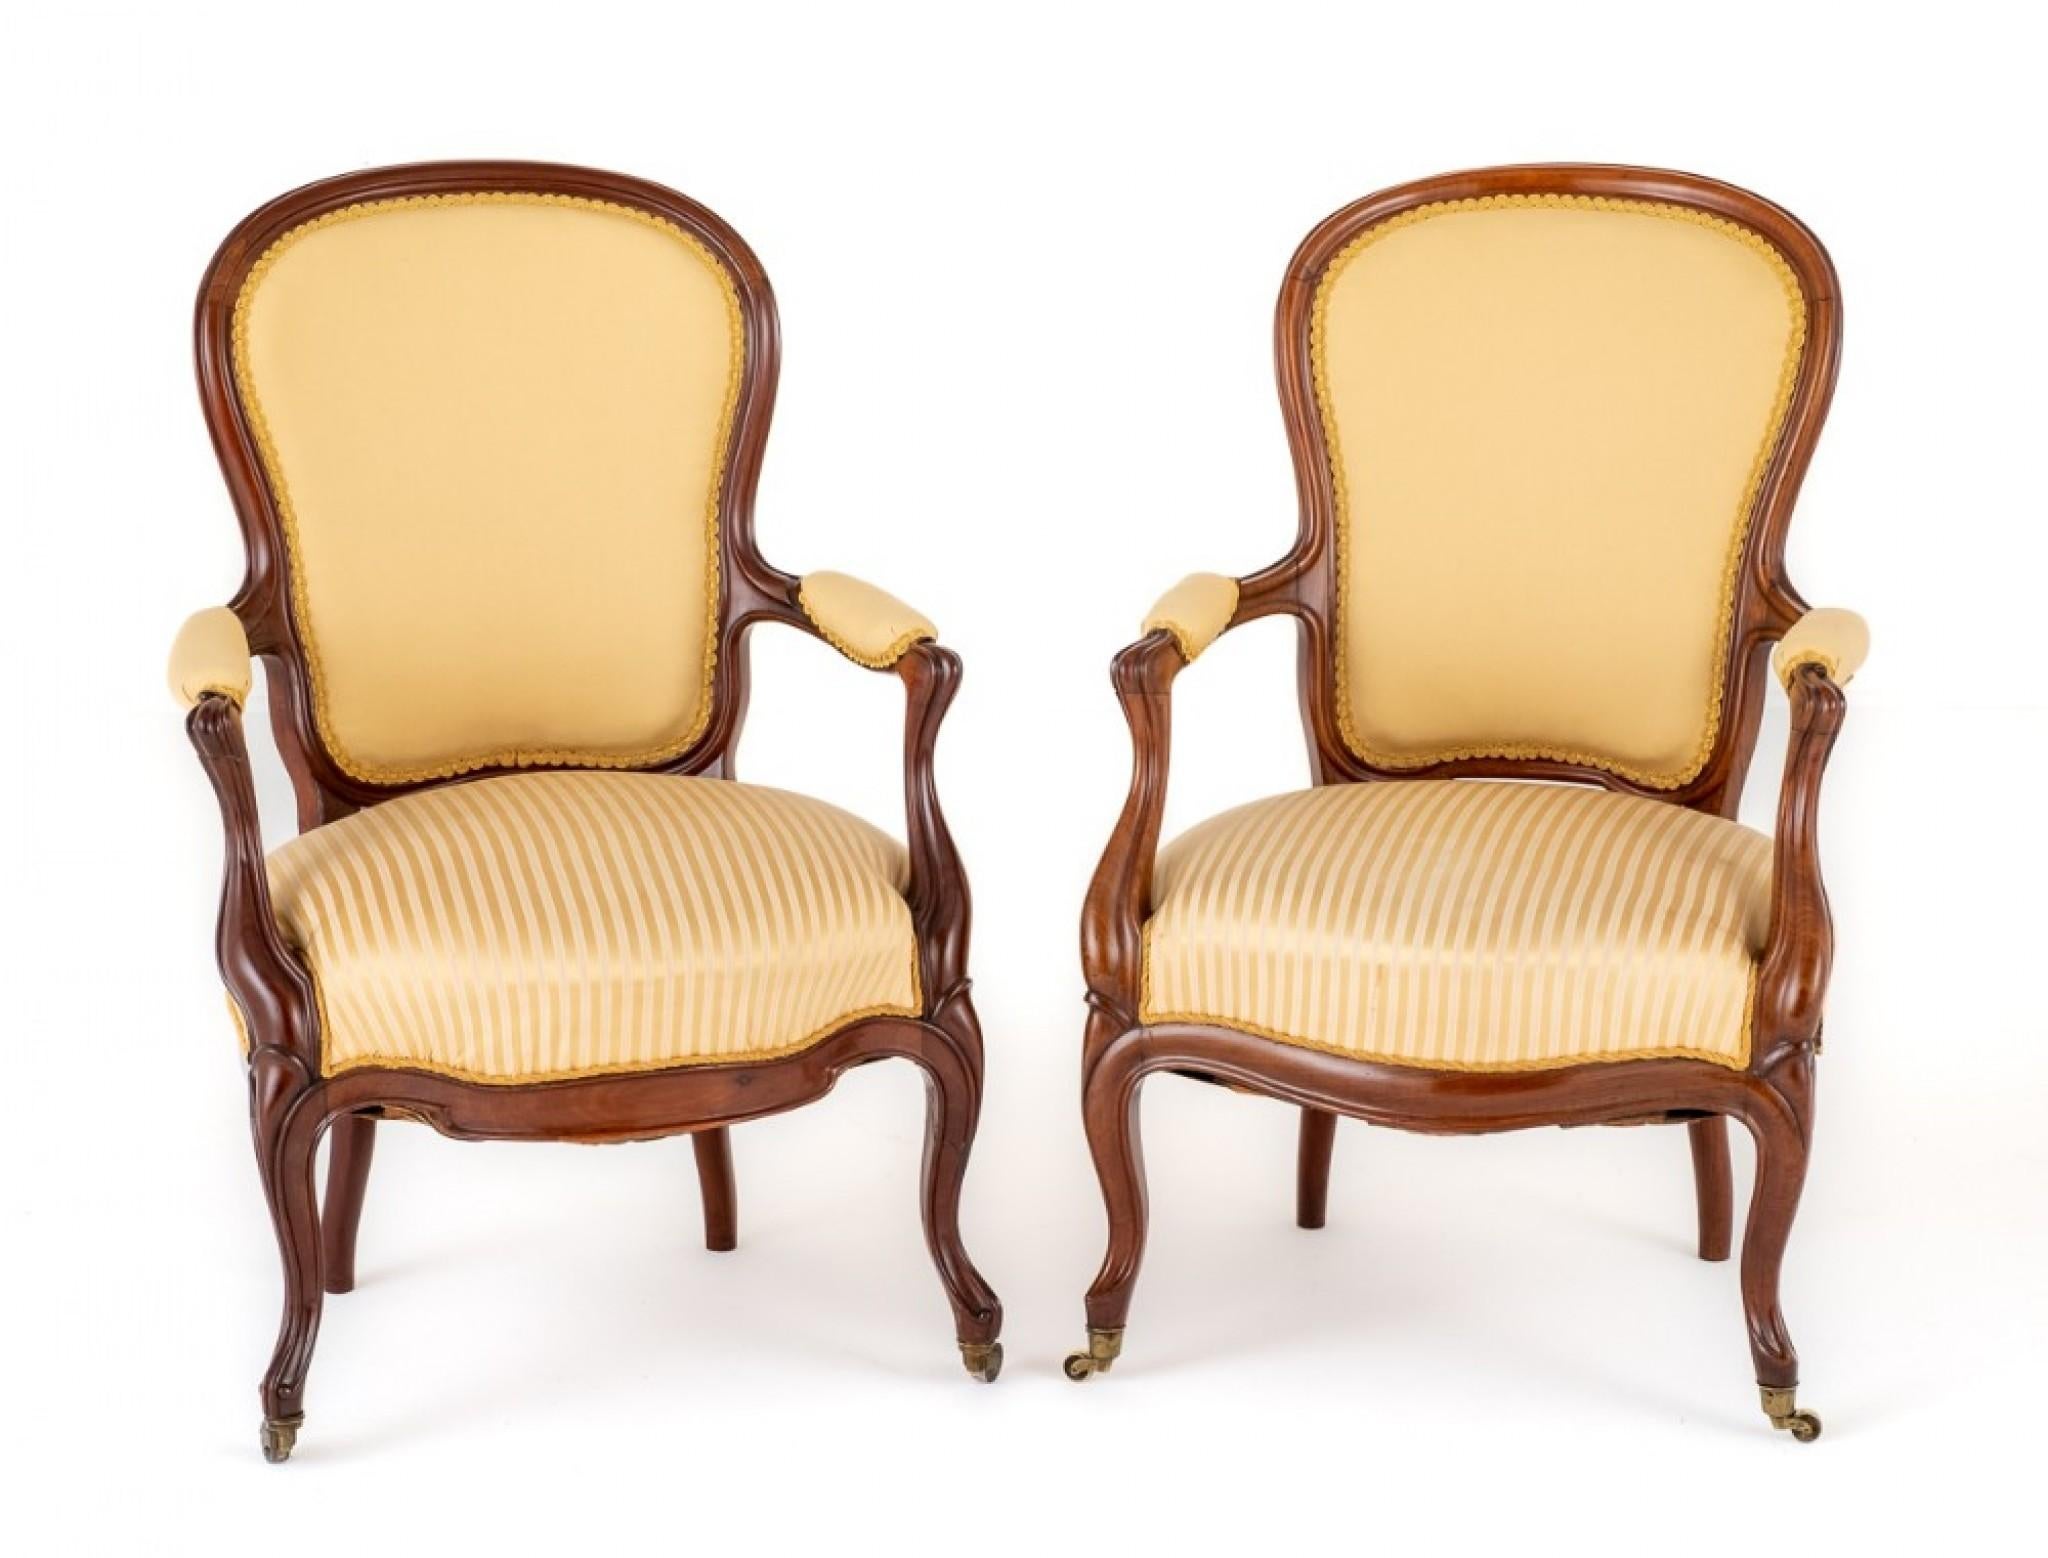 Pair of Victorian Rosewood Open Armchairs.
Raised upon Cabriole Front Legs with Brass Castors and Swept Back Legs.
Circa 1870
Having a Shaped Frieze Rail and Carved and Shaped Arm Supports.
The Arms being of a Padded Form.
The Chairs Having a Wood